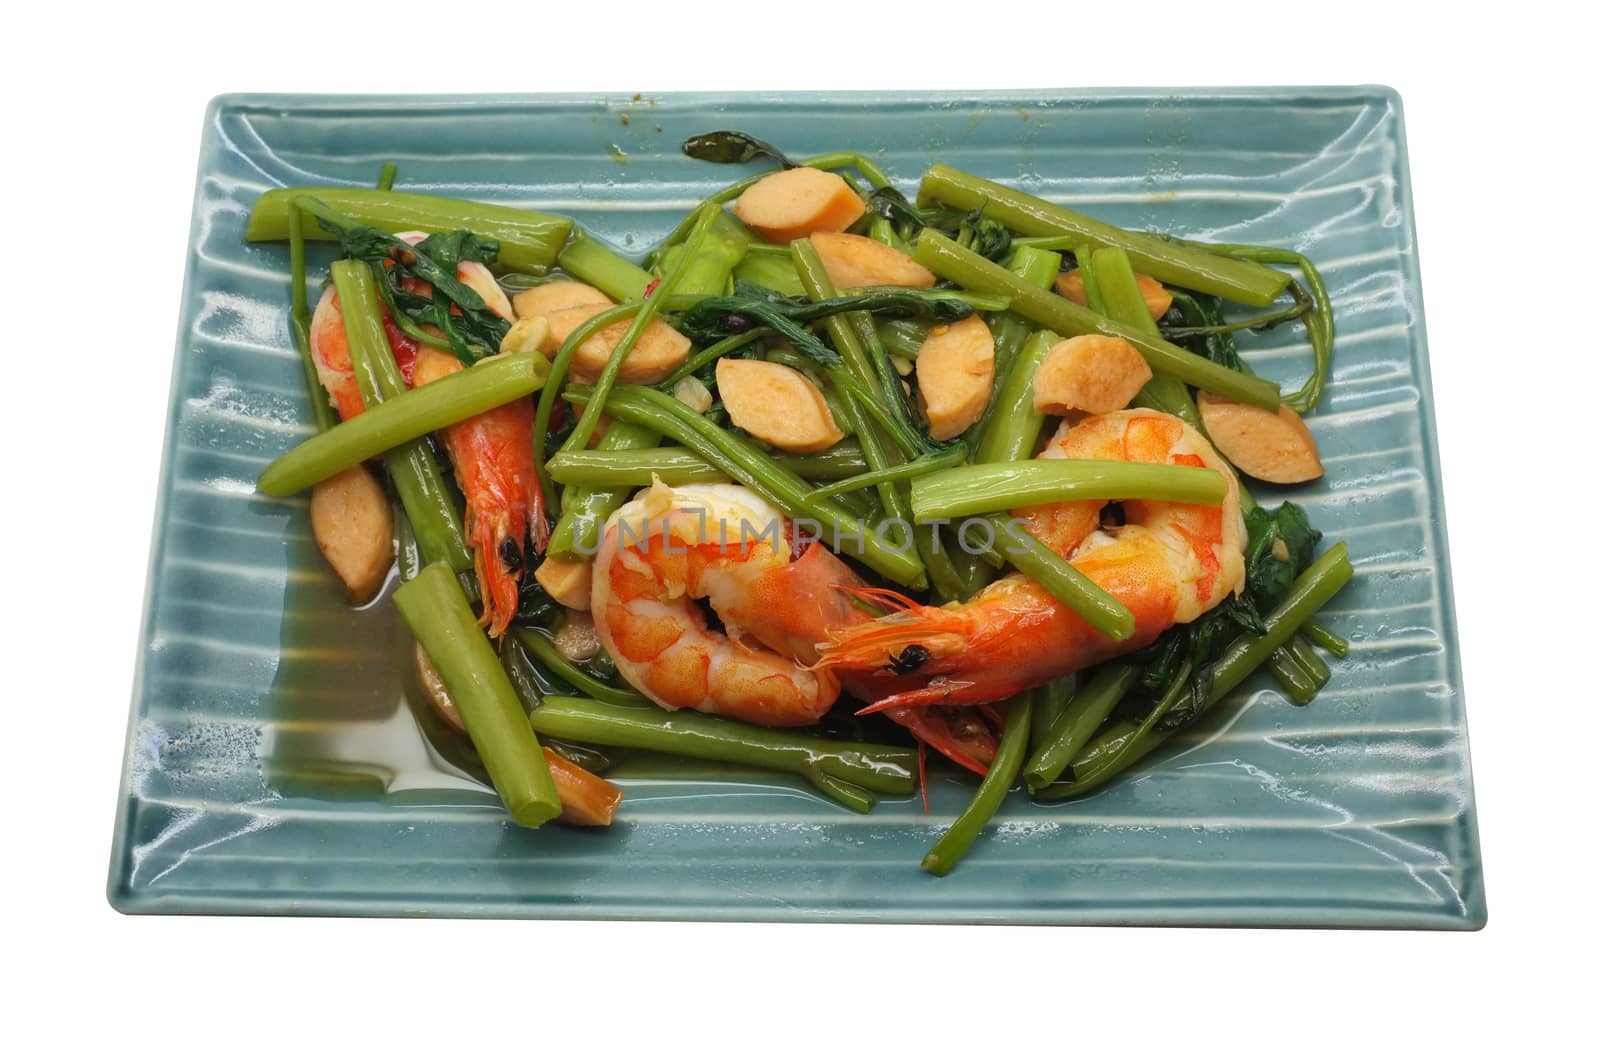 Stir Fried Water Spinach / Morning Glory with shrimp / seafood, Thai food by Hepjam